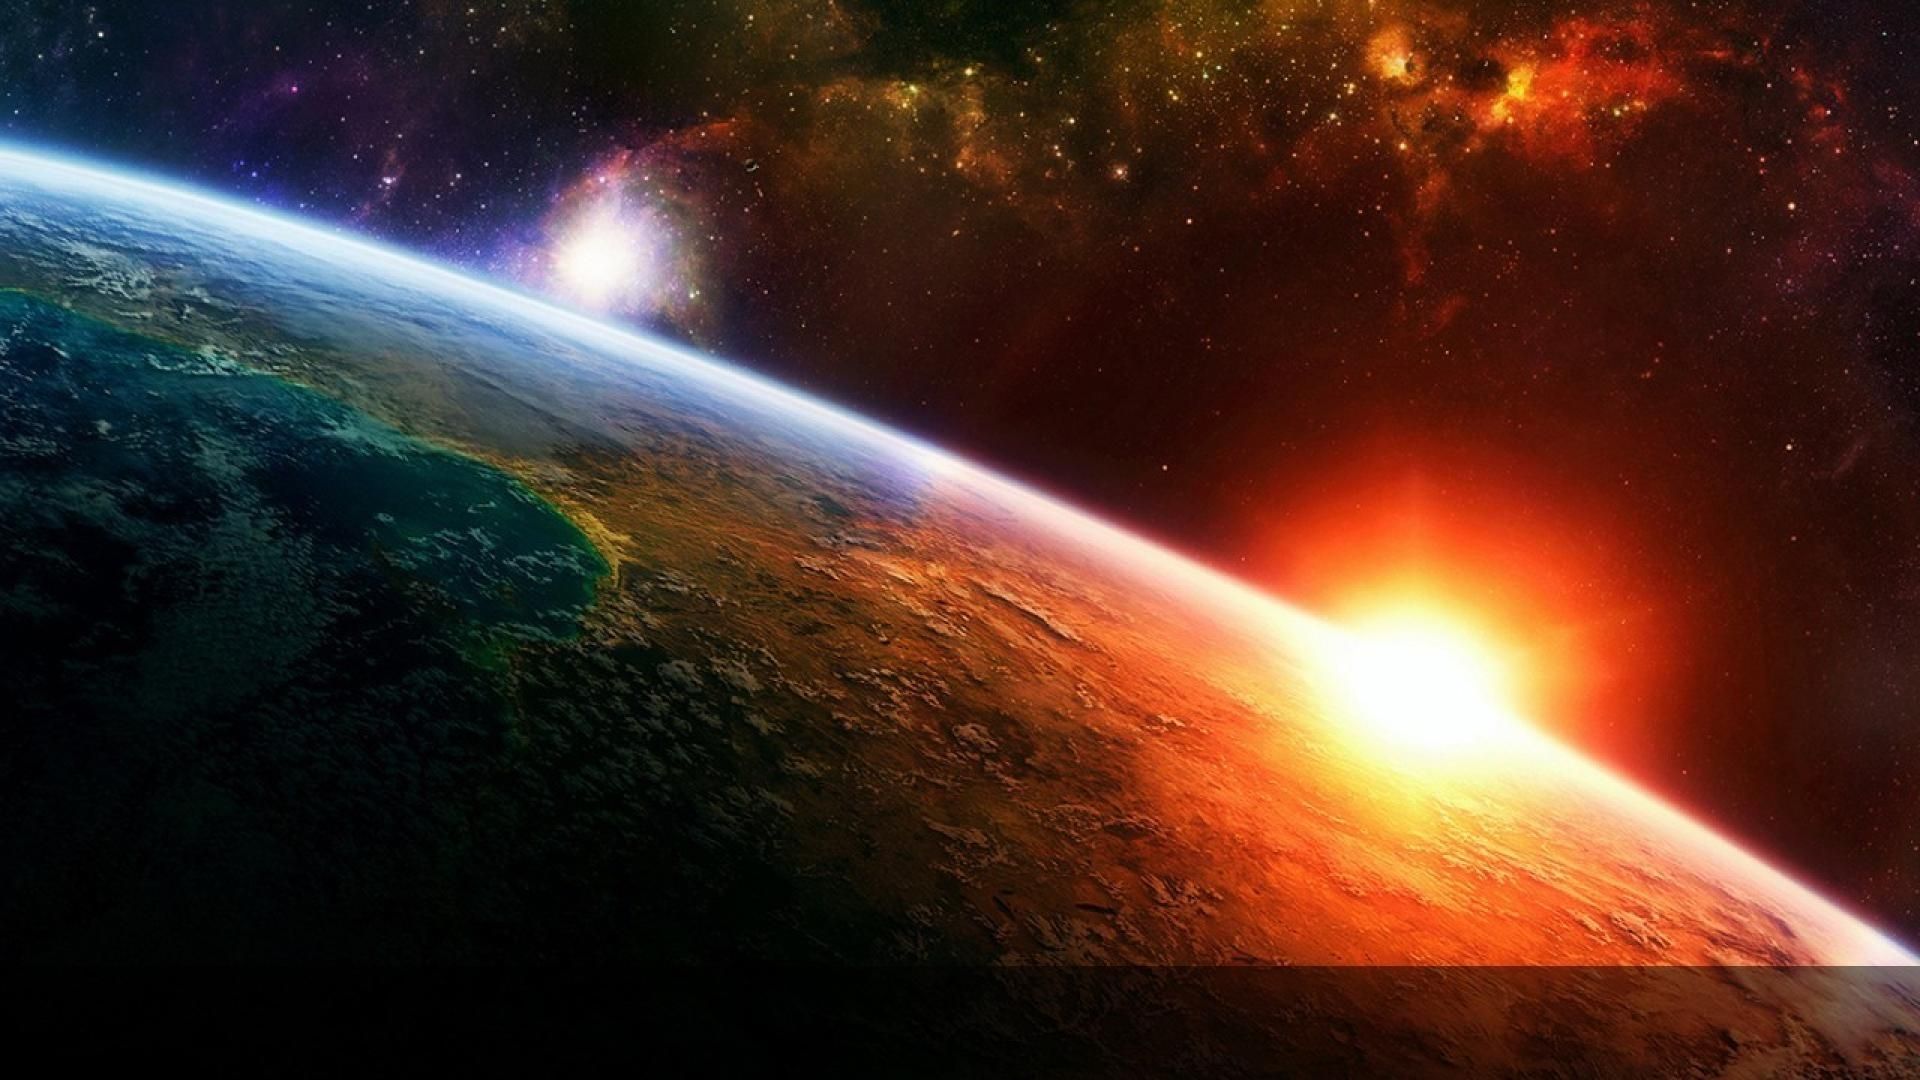 Cool Wallpapers 1920x1080 with Earth on Space | HD Wallpapers for Free